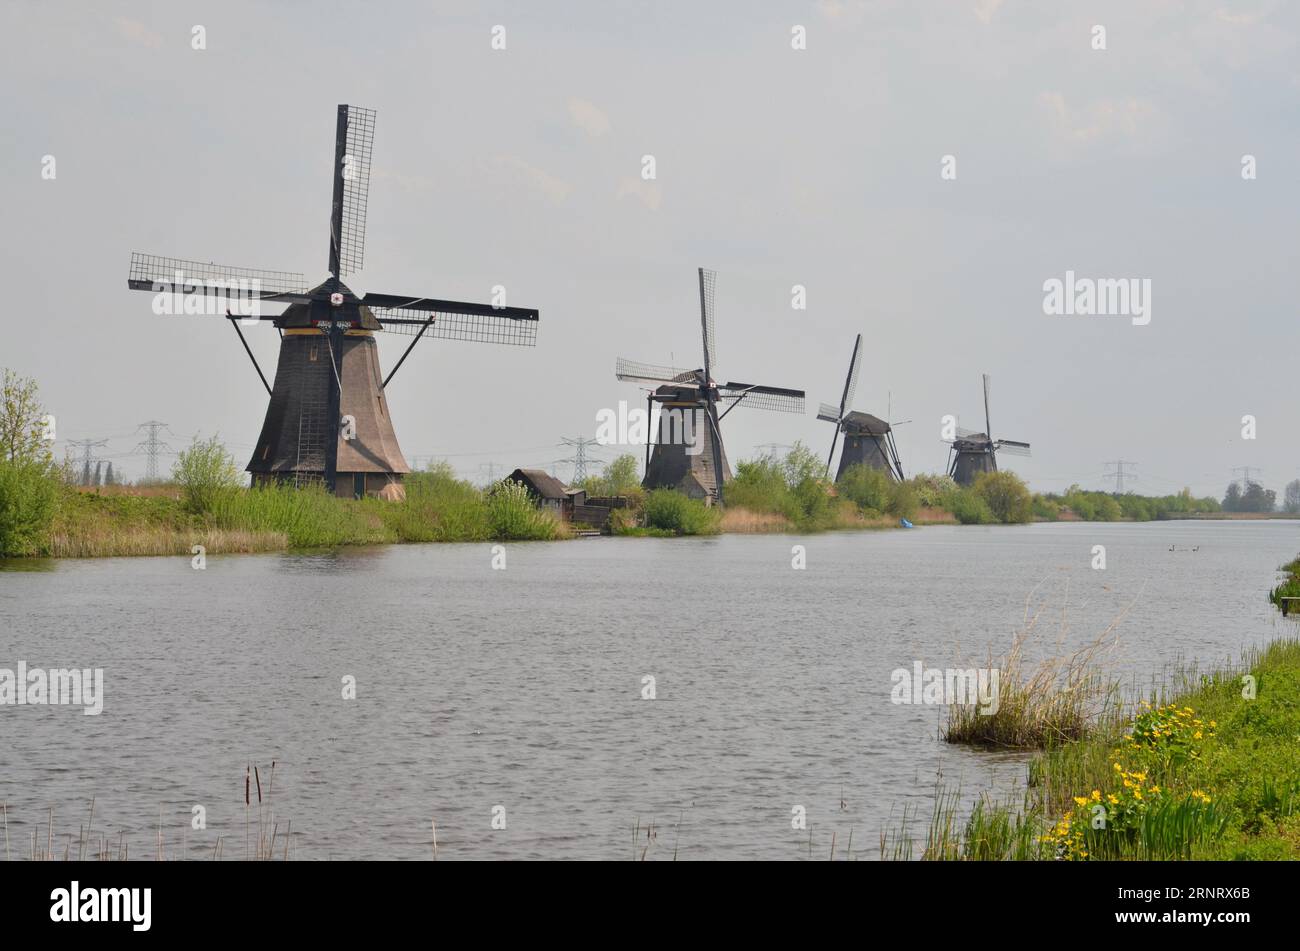 The 19 windmills of Kinderdijk are located 15 km from Rotterdam. They are part of the UNESCO World Heritage site. Stock Photo